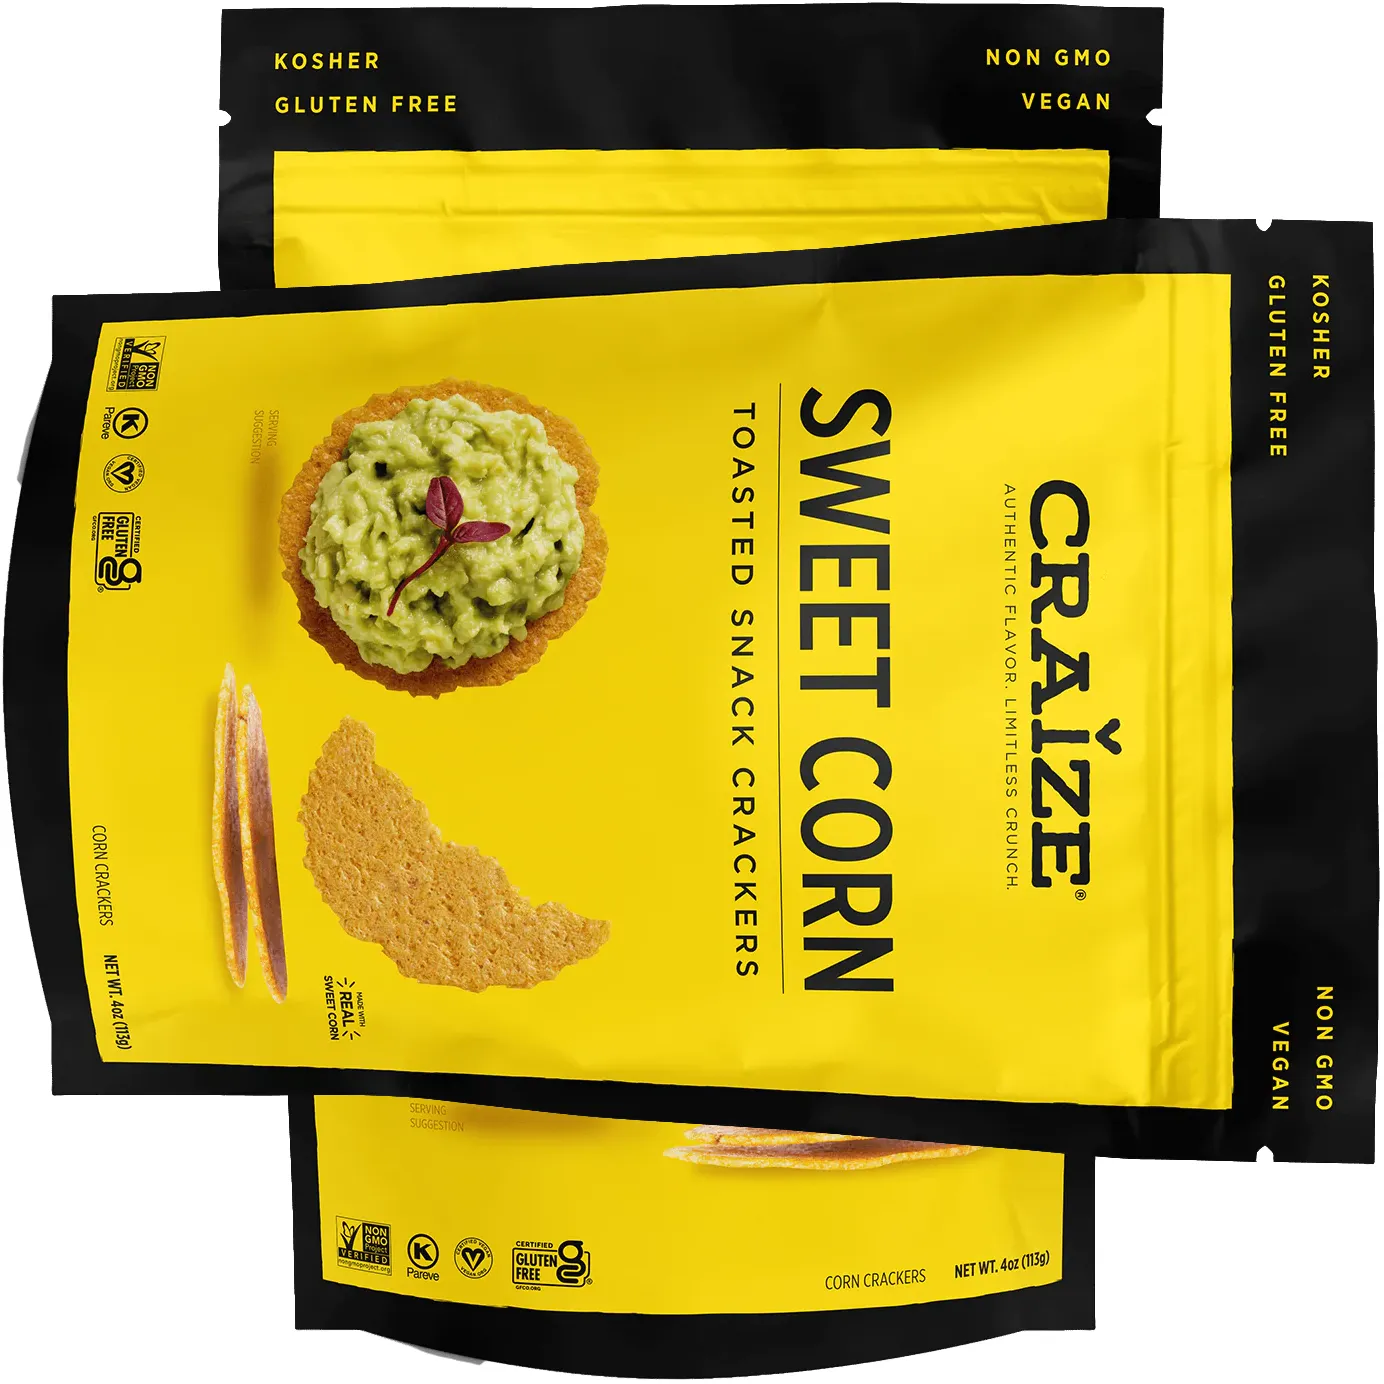 Free Craize All Natural Dairy-Free Soy-Free Snack Crackers